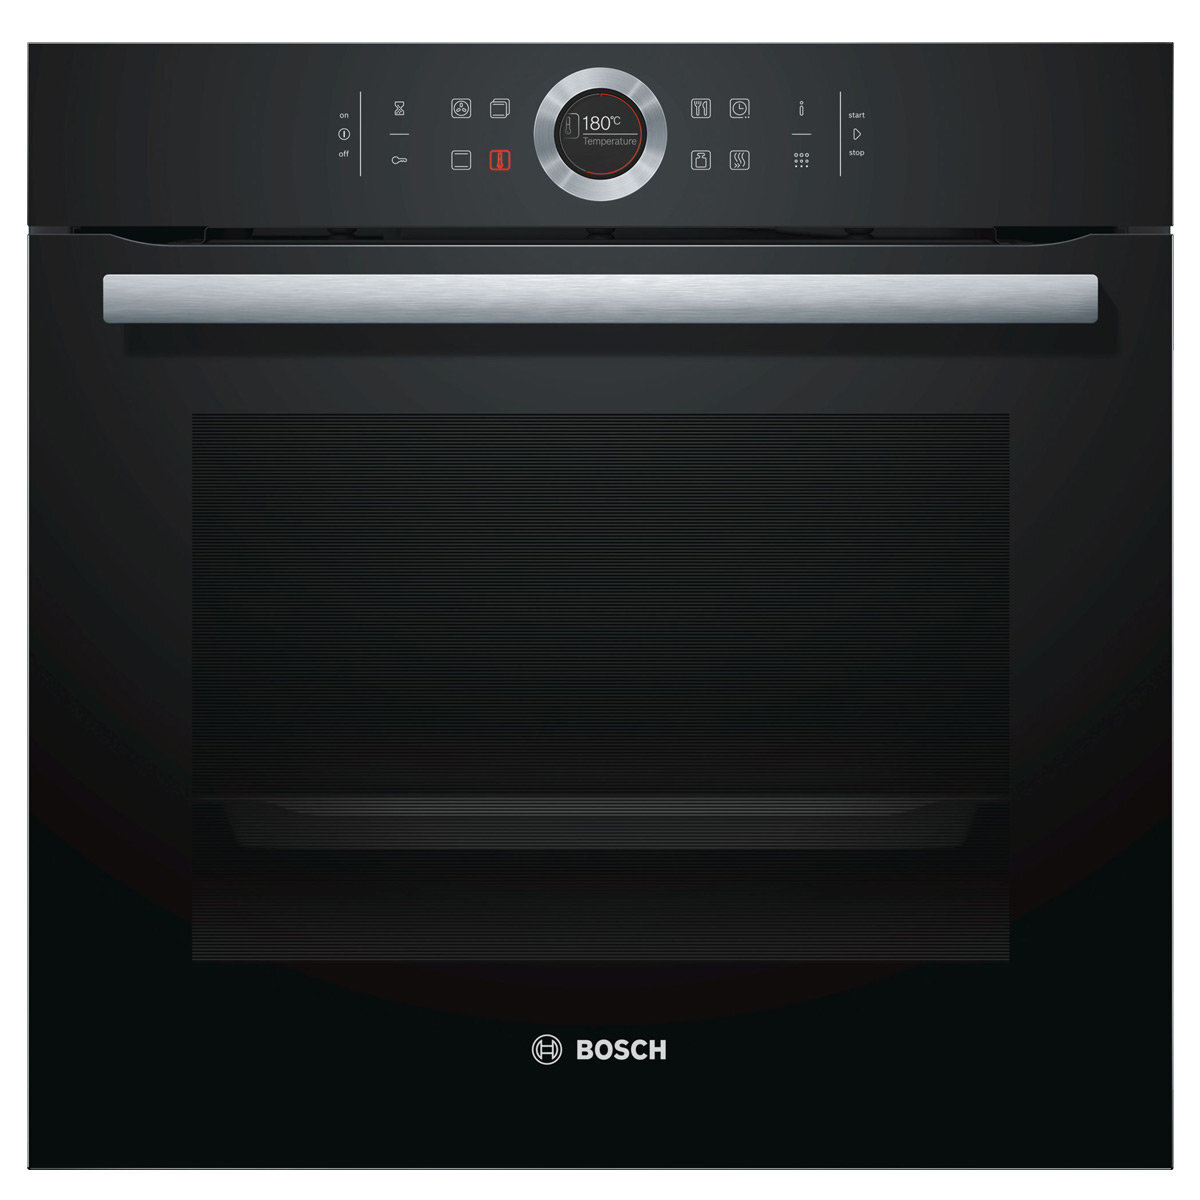 Bosch 60cm Serie 8 Built-in Pyrolytic Electric Oven